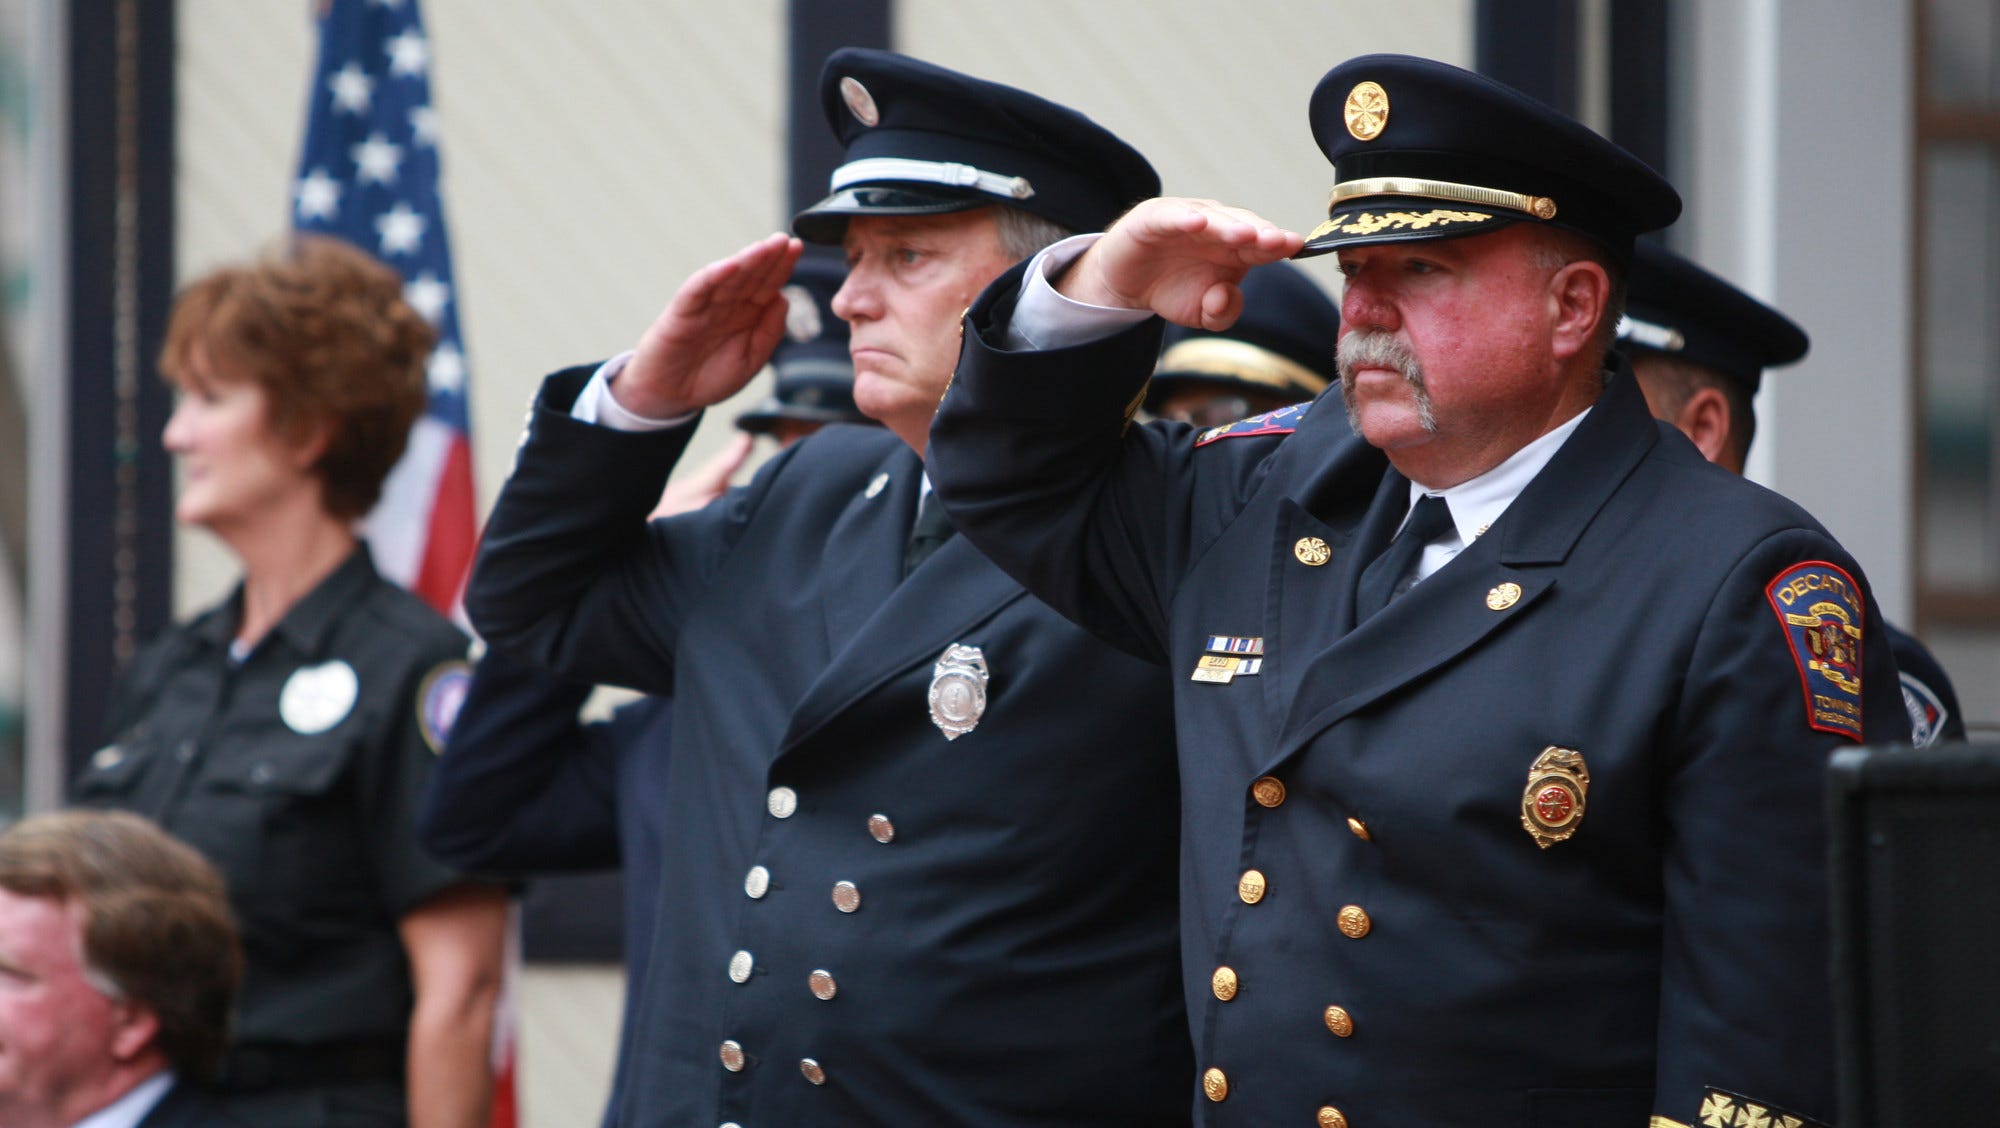 Police, firefighter unions sue city of Indianapolis